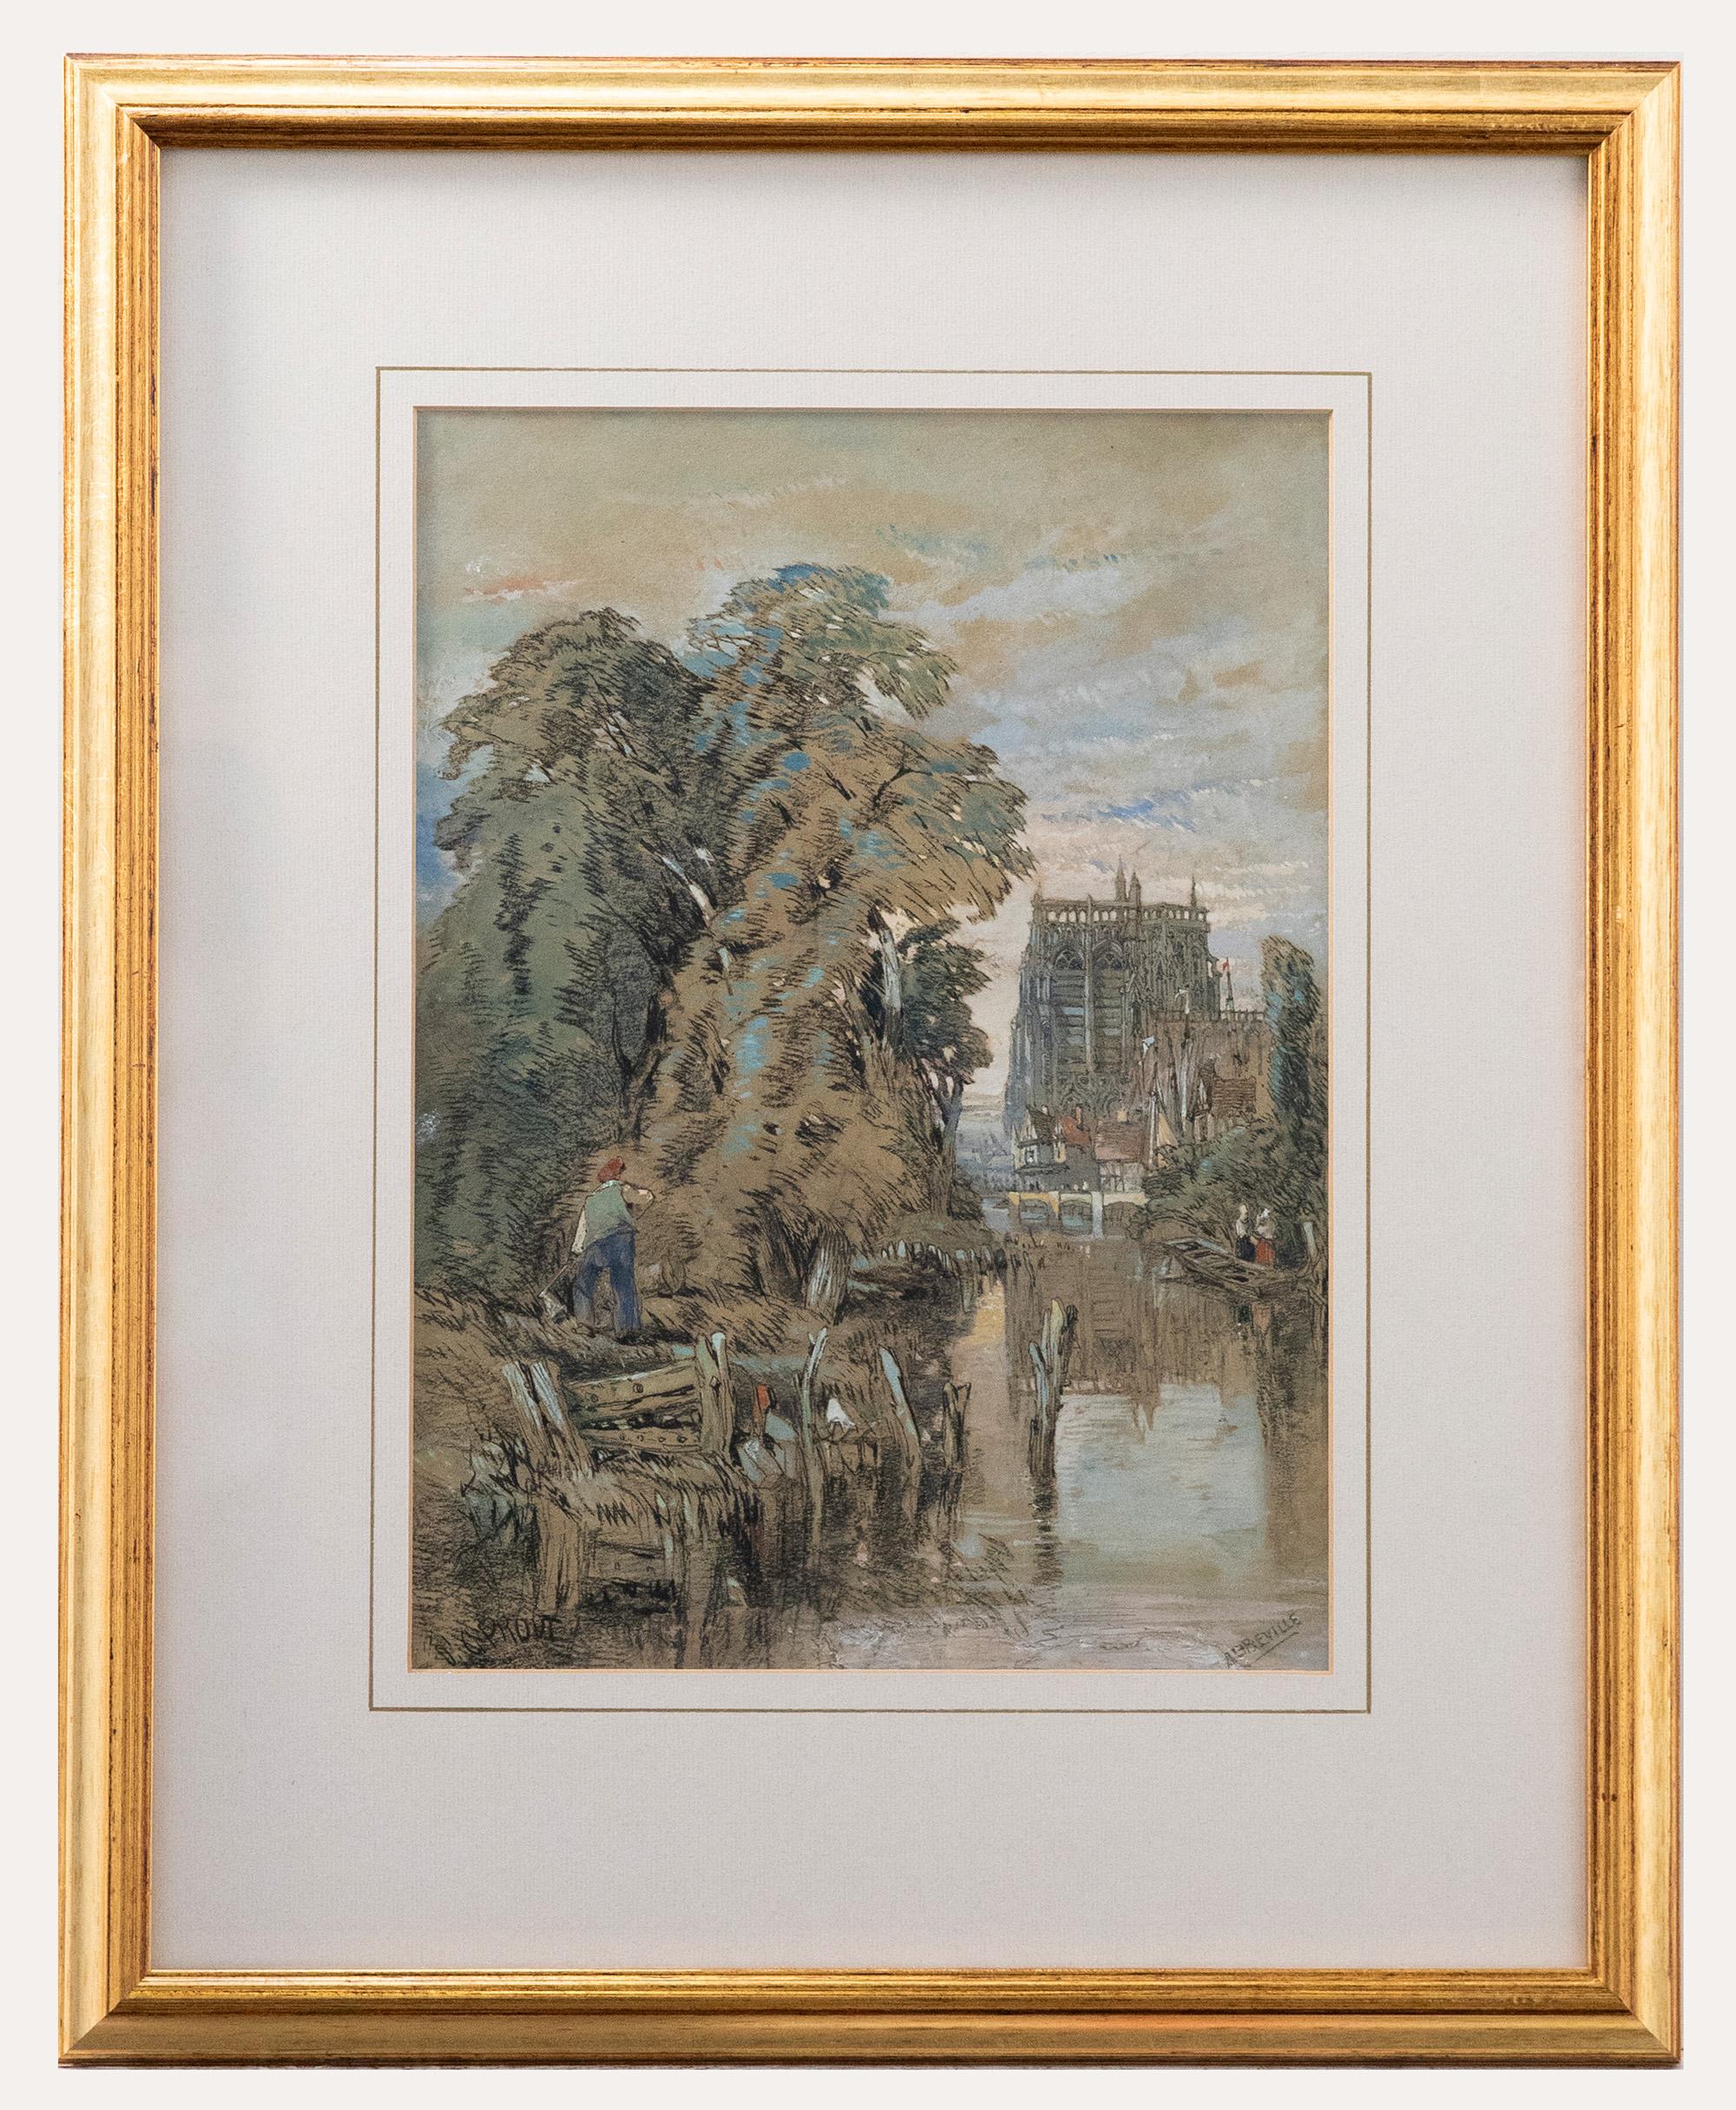 A charming study of a local man fishing on the banks of the River Somme. The bell towers of St. Wolfram can be seen to the distance, towering over the town of Abbeville. Well-presented in a gilt-effect frame with card mount. Bearing the signature